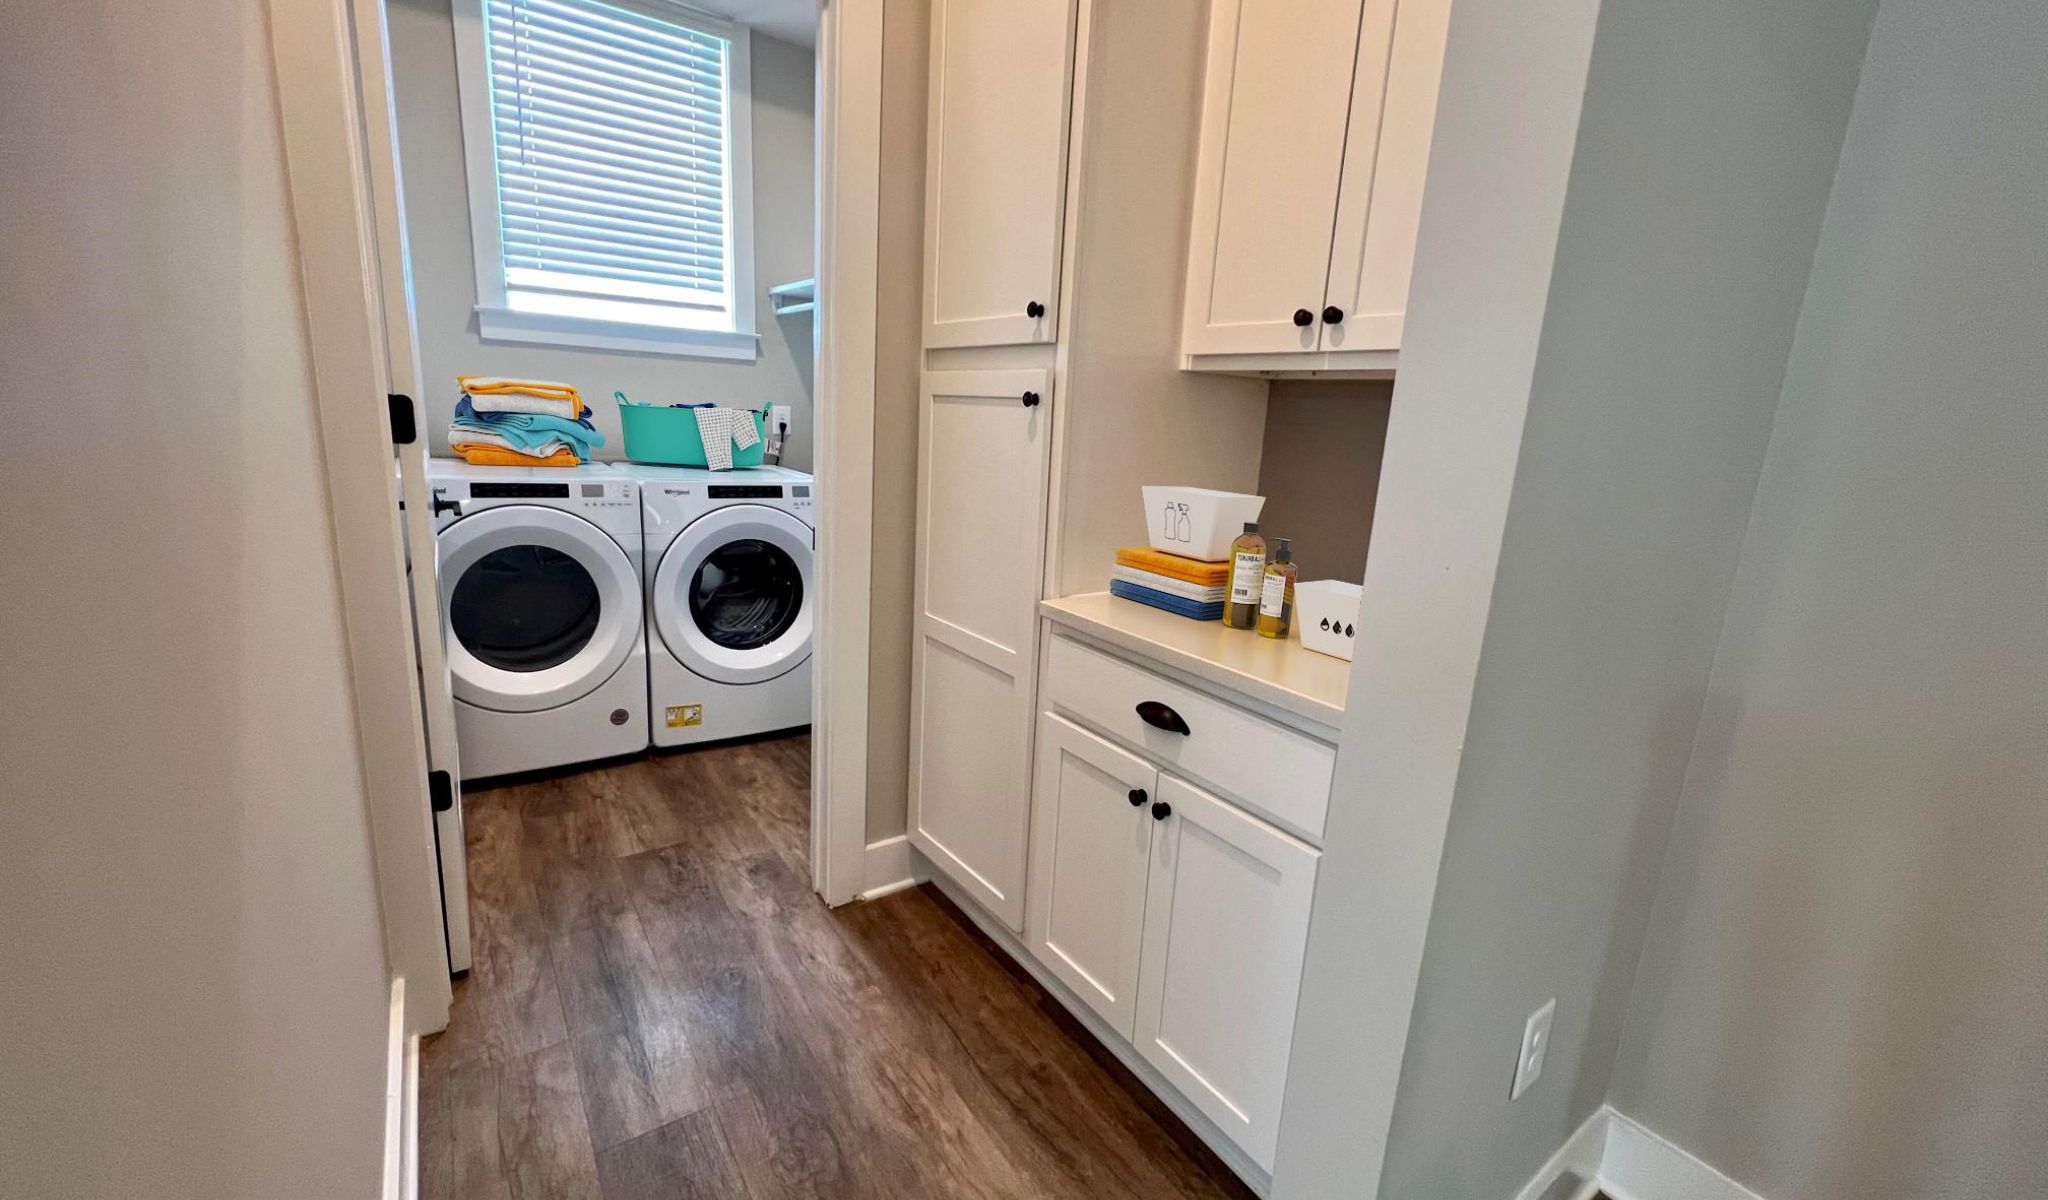 Townhomes at Bridlestone laundry rooom with modern washer and dryer